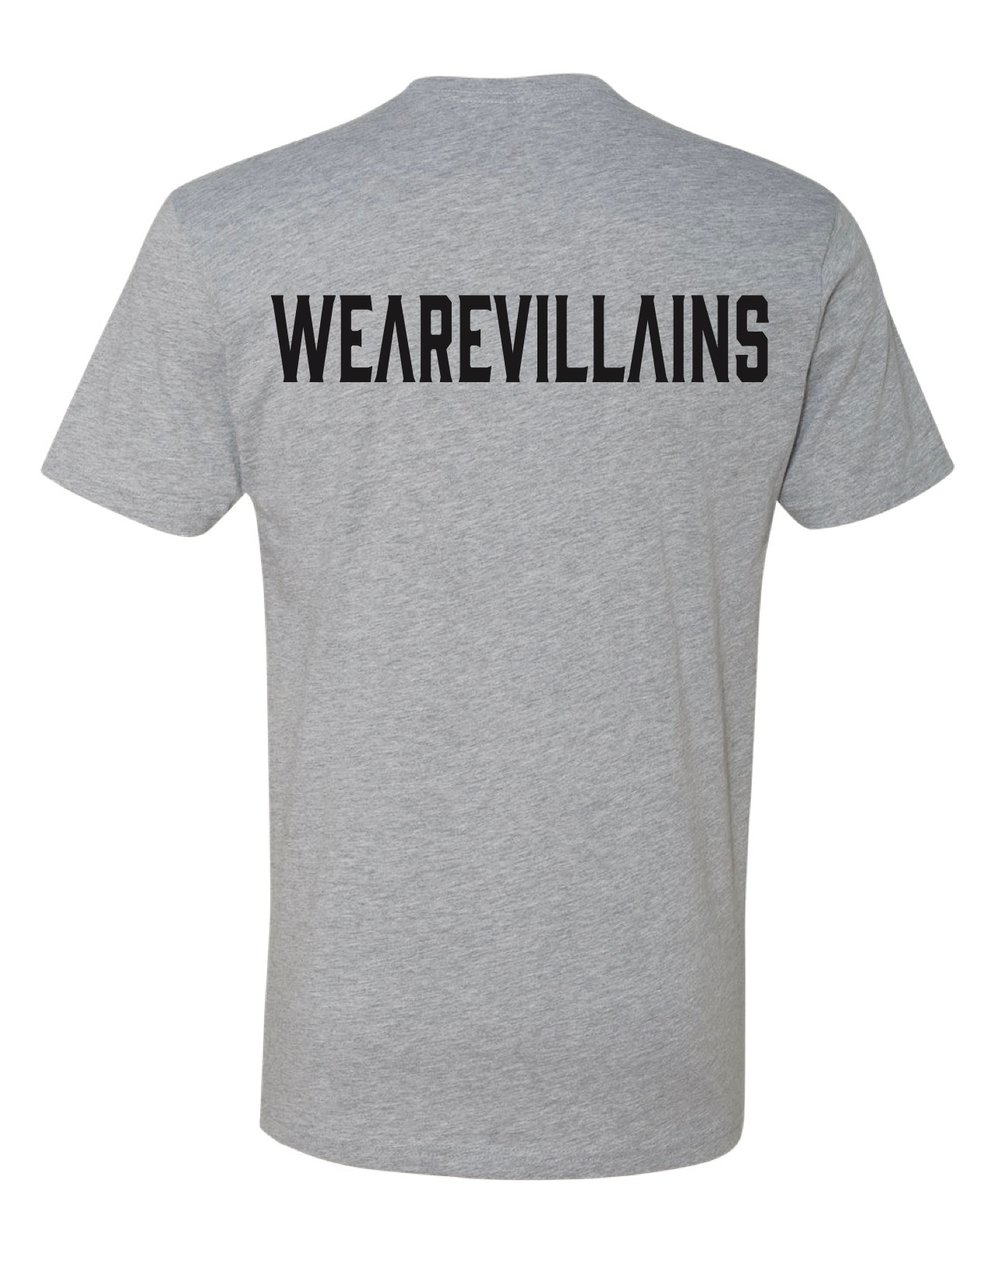 VERY FIRST WEAREVILLAINS RELEASE